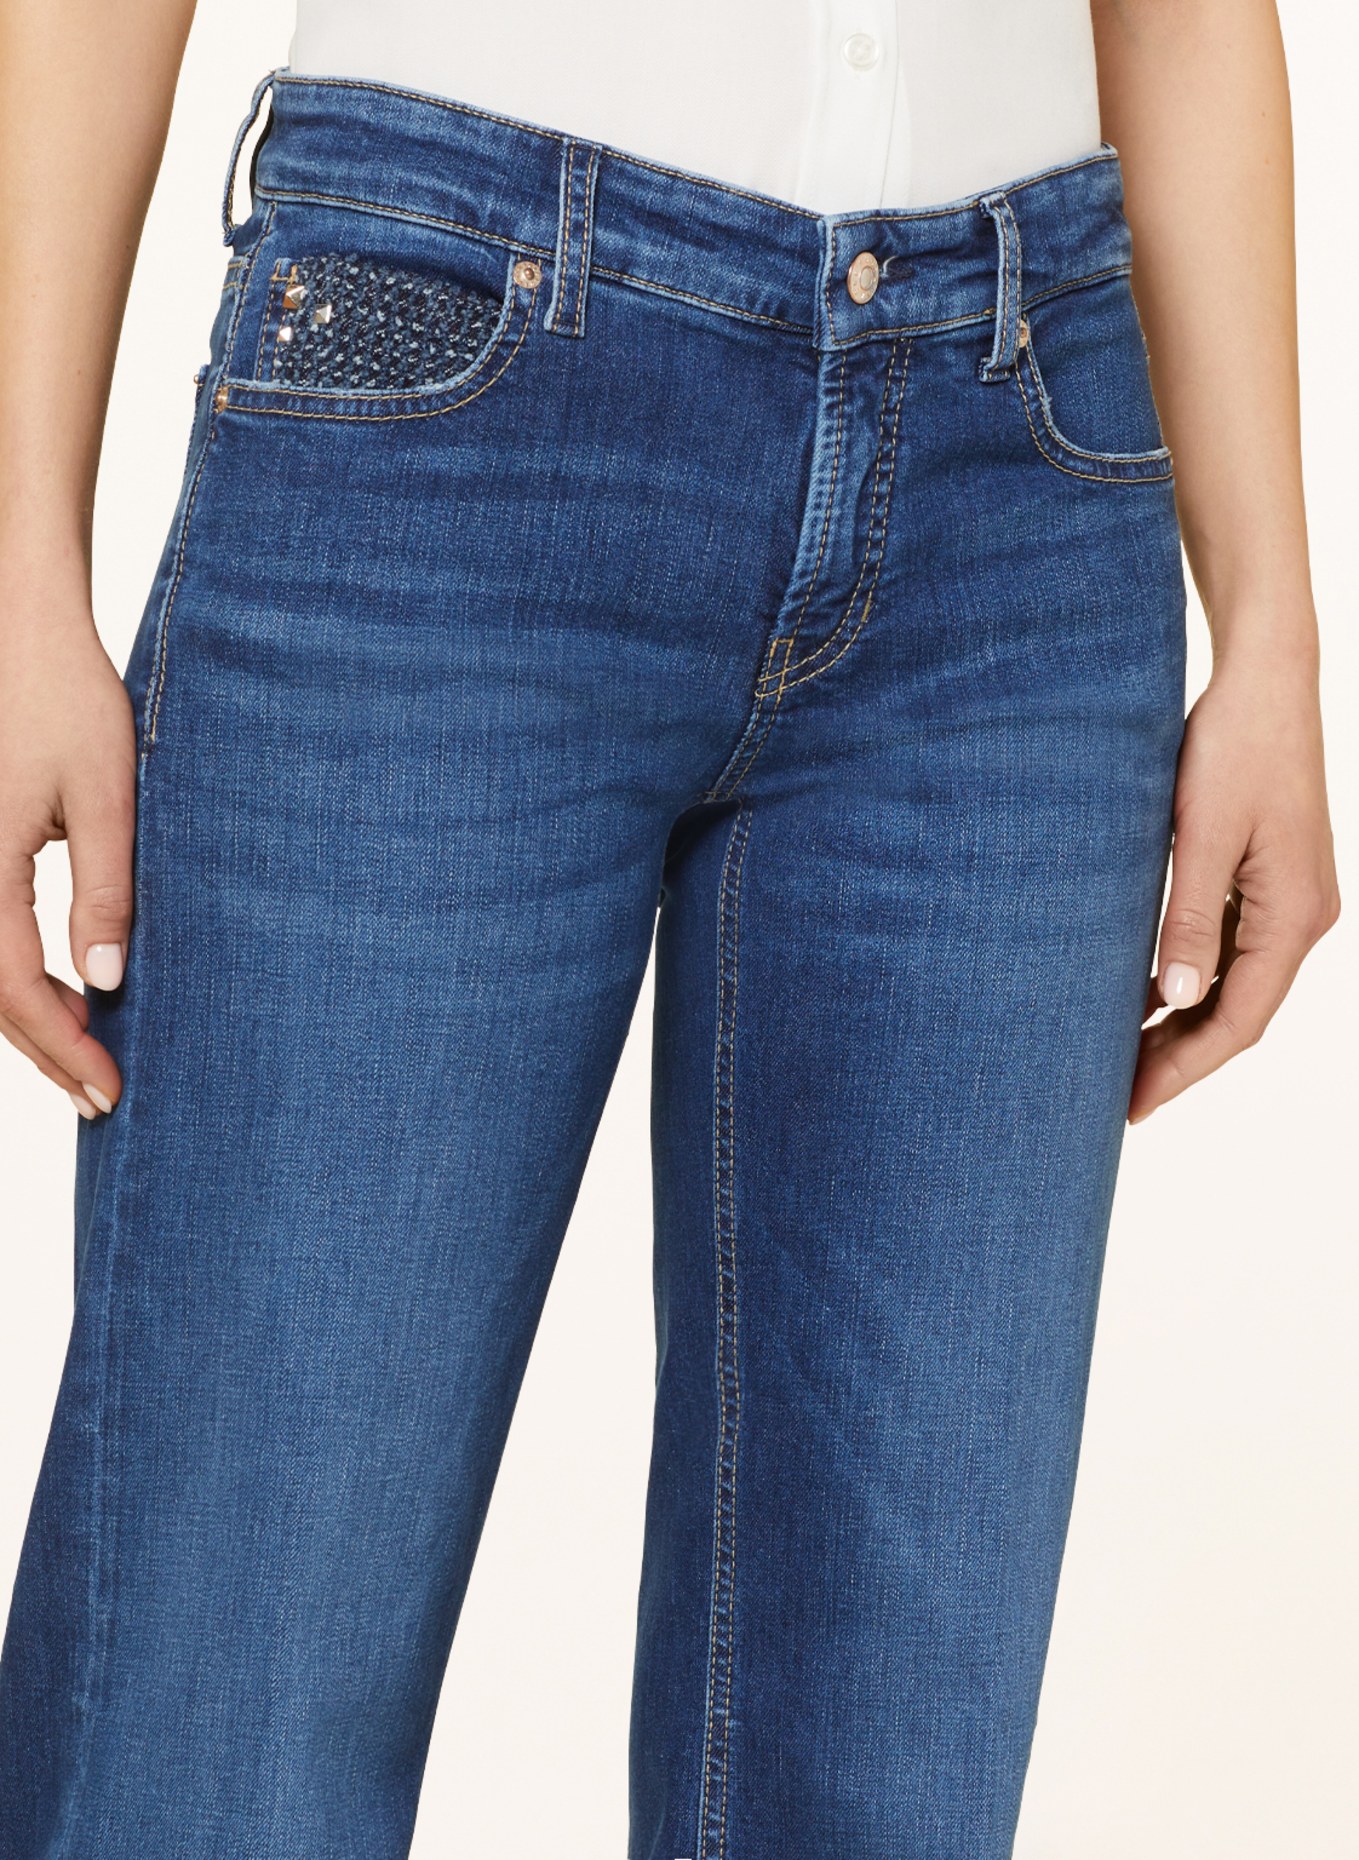 CAMBIO Flared jeans TESS, Color: 5187 eco used (Image 5)